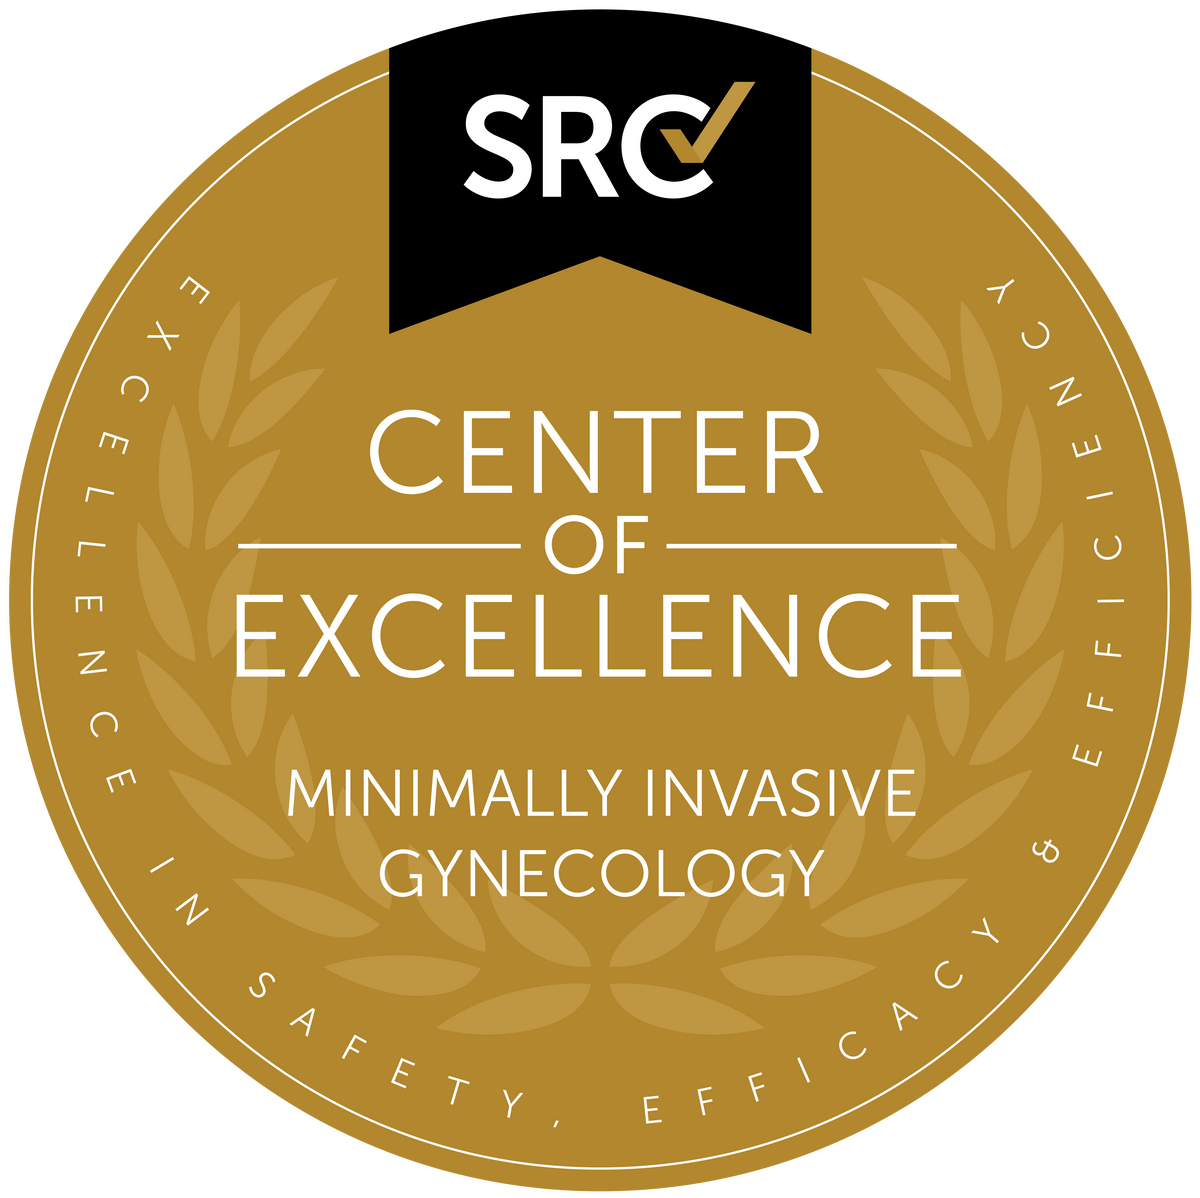 SRC Center of Excellence in Minimally Invasive Gynecology